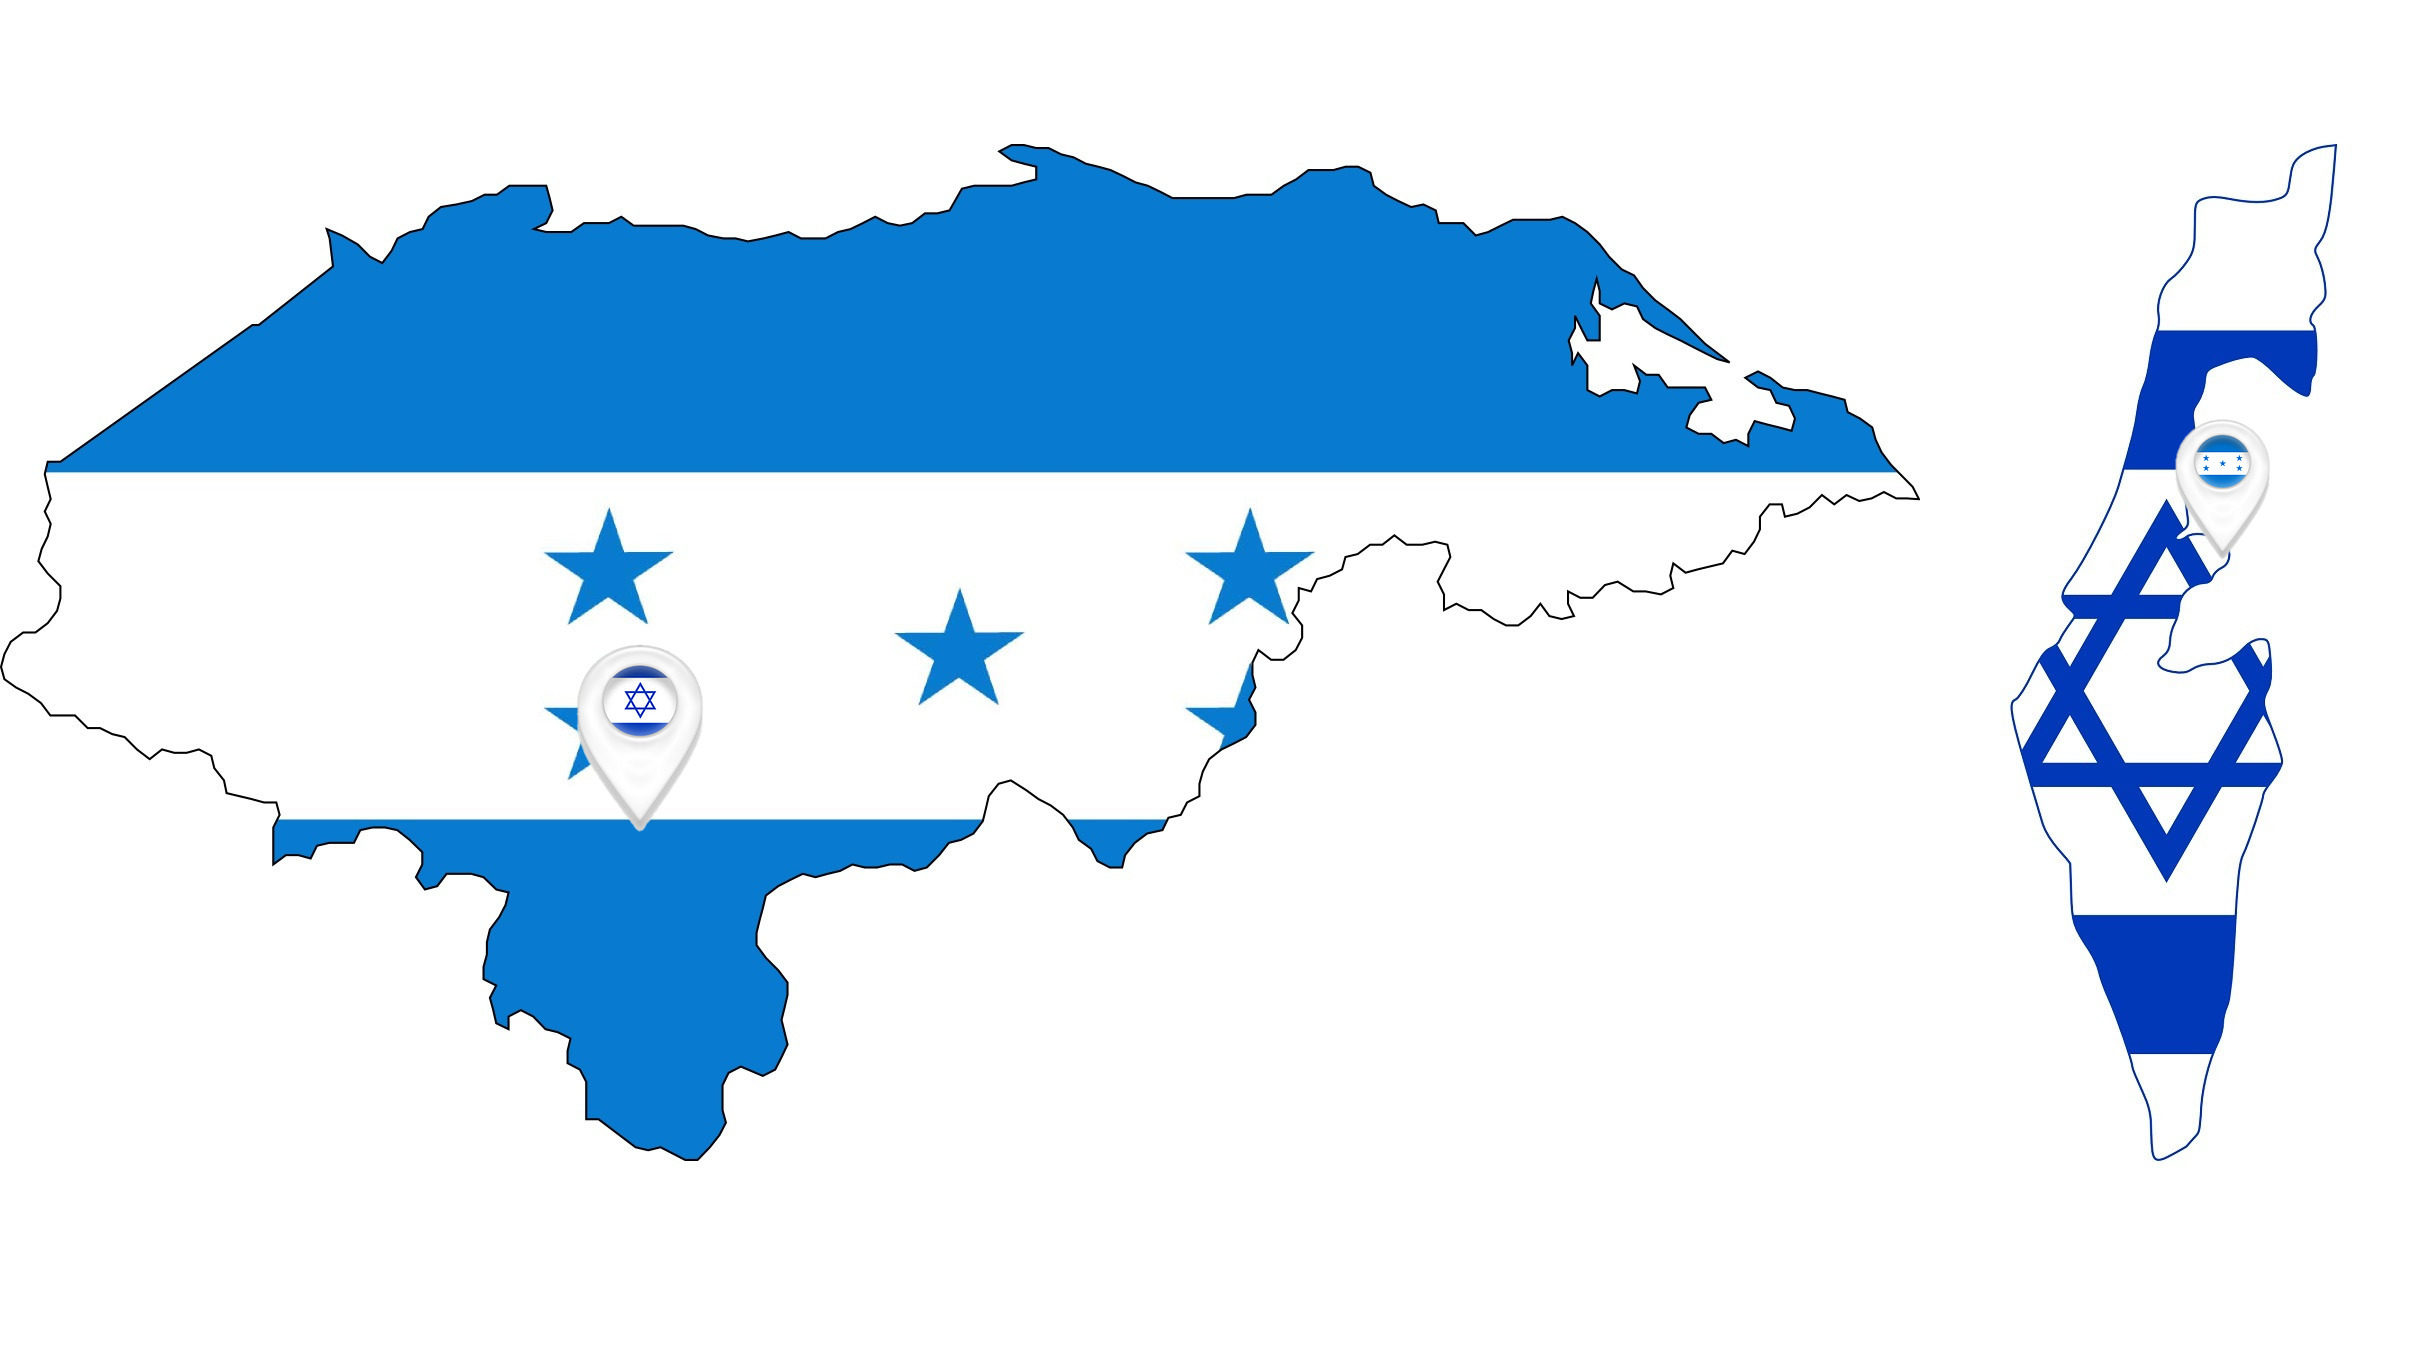 Honduras and Israel to Open Embassies in Jerusalem, Tegucigalpa by End of 2020